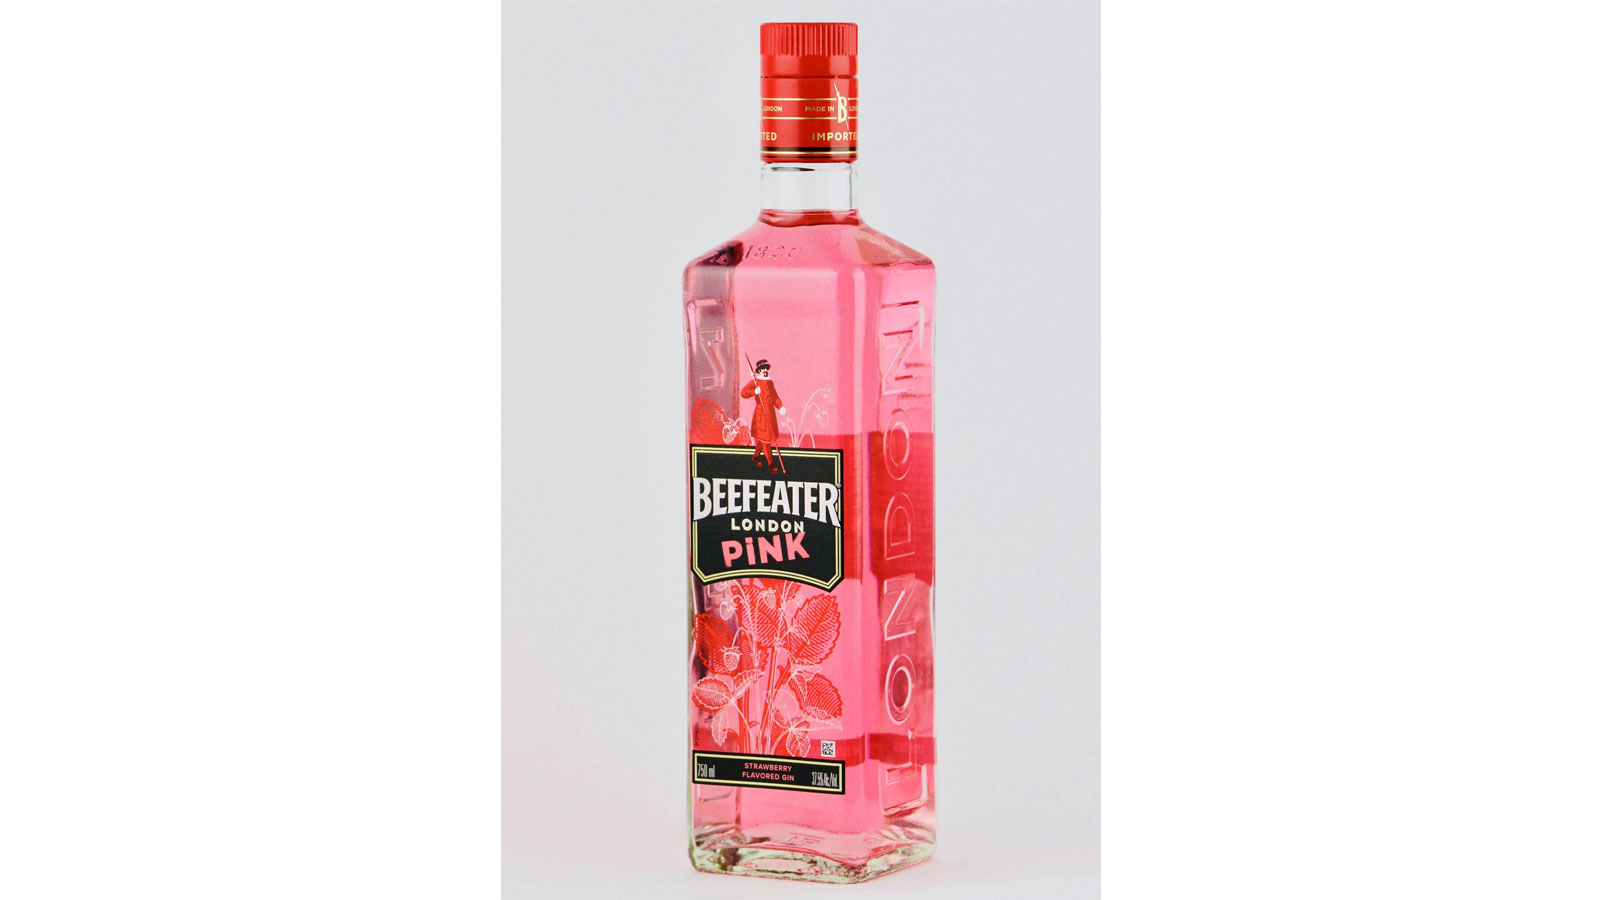 Introducing Beefeater Pink 